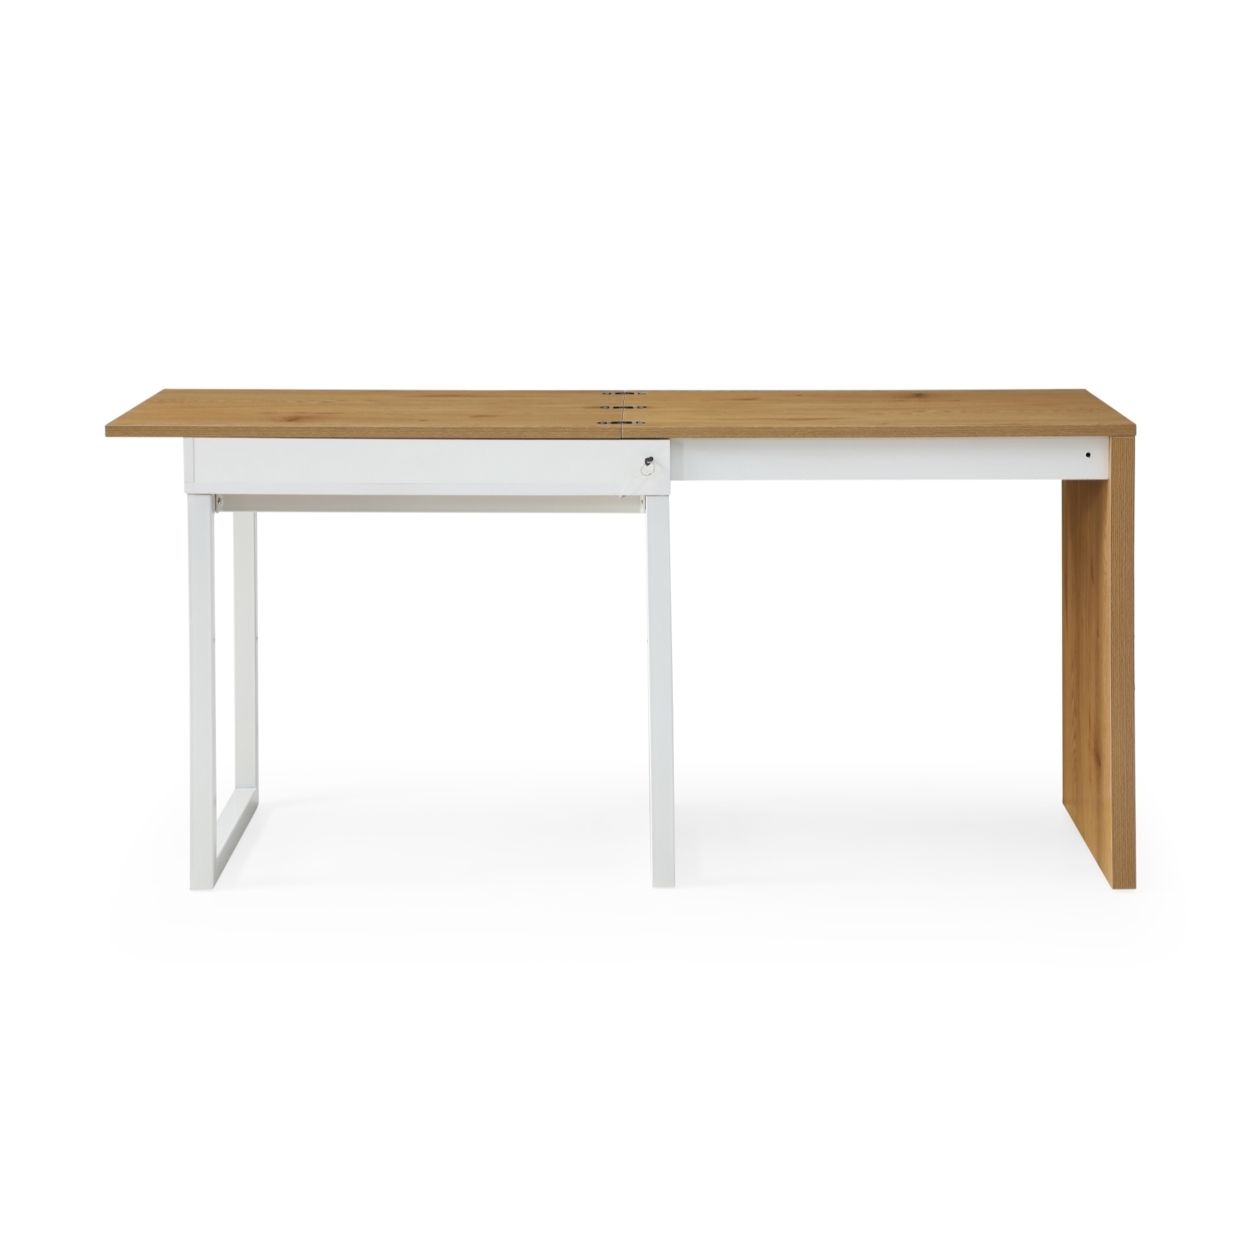 Ashly Desk-Extendable, Space Saving Design-2 Top Open Storage Compartments-A Lock With A Key - Natural/white